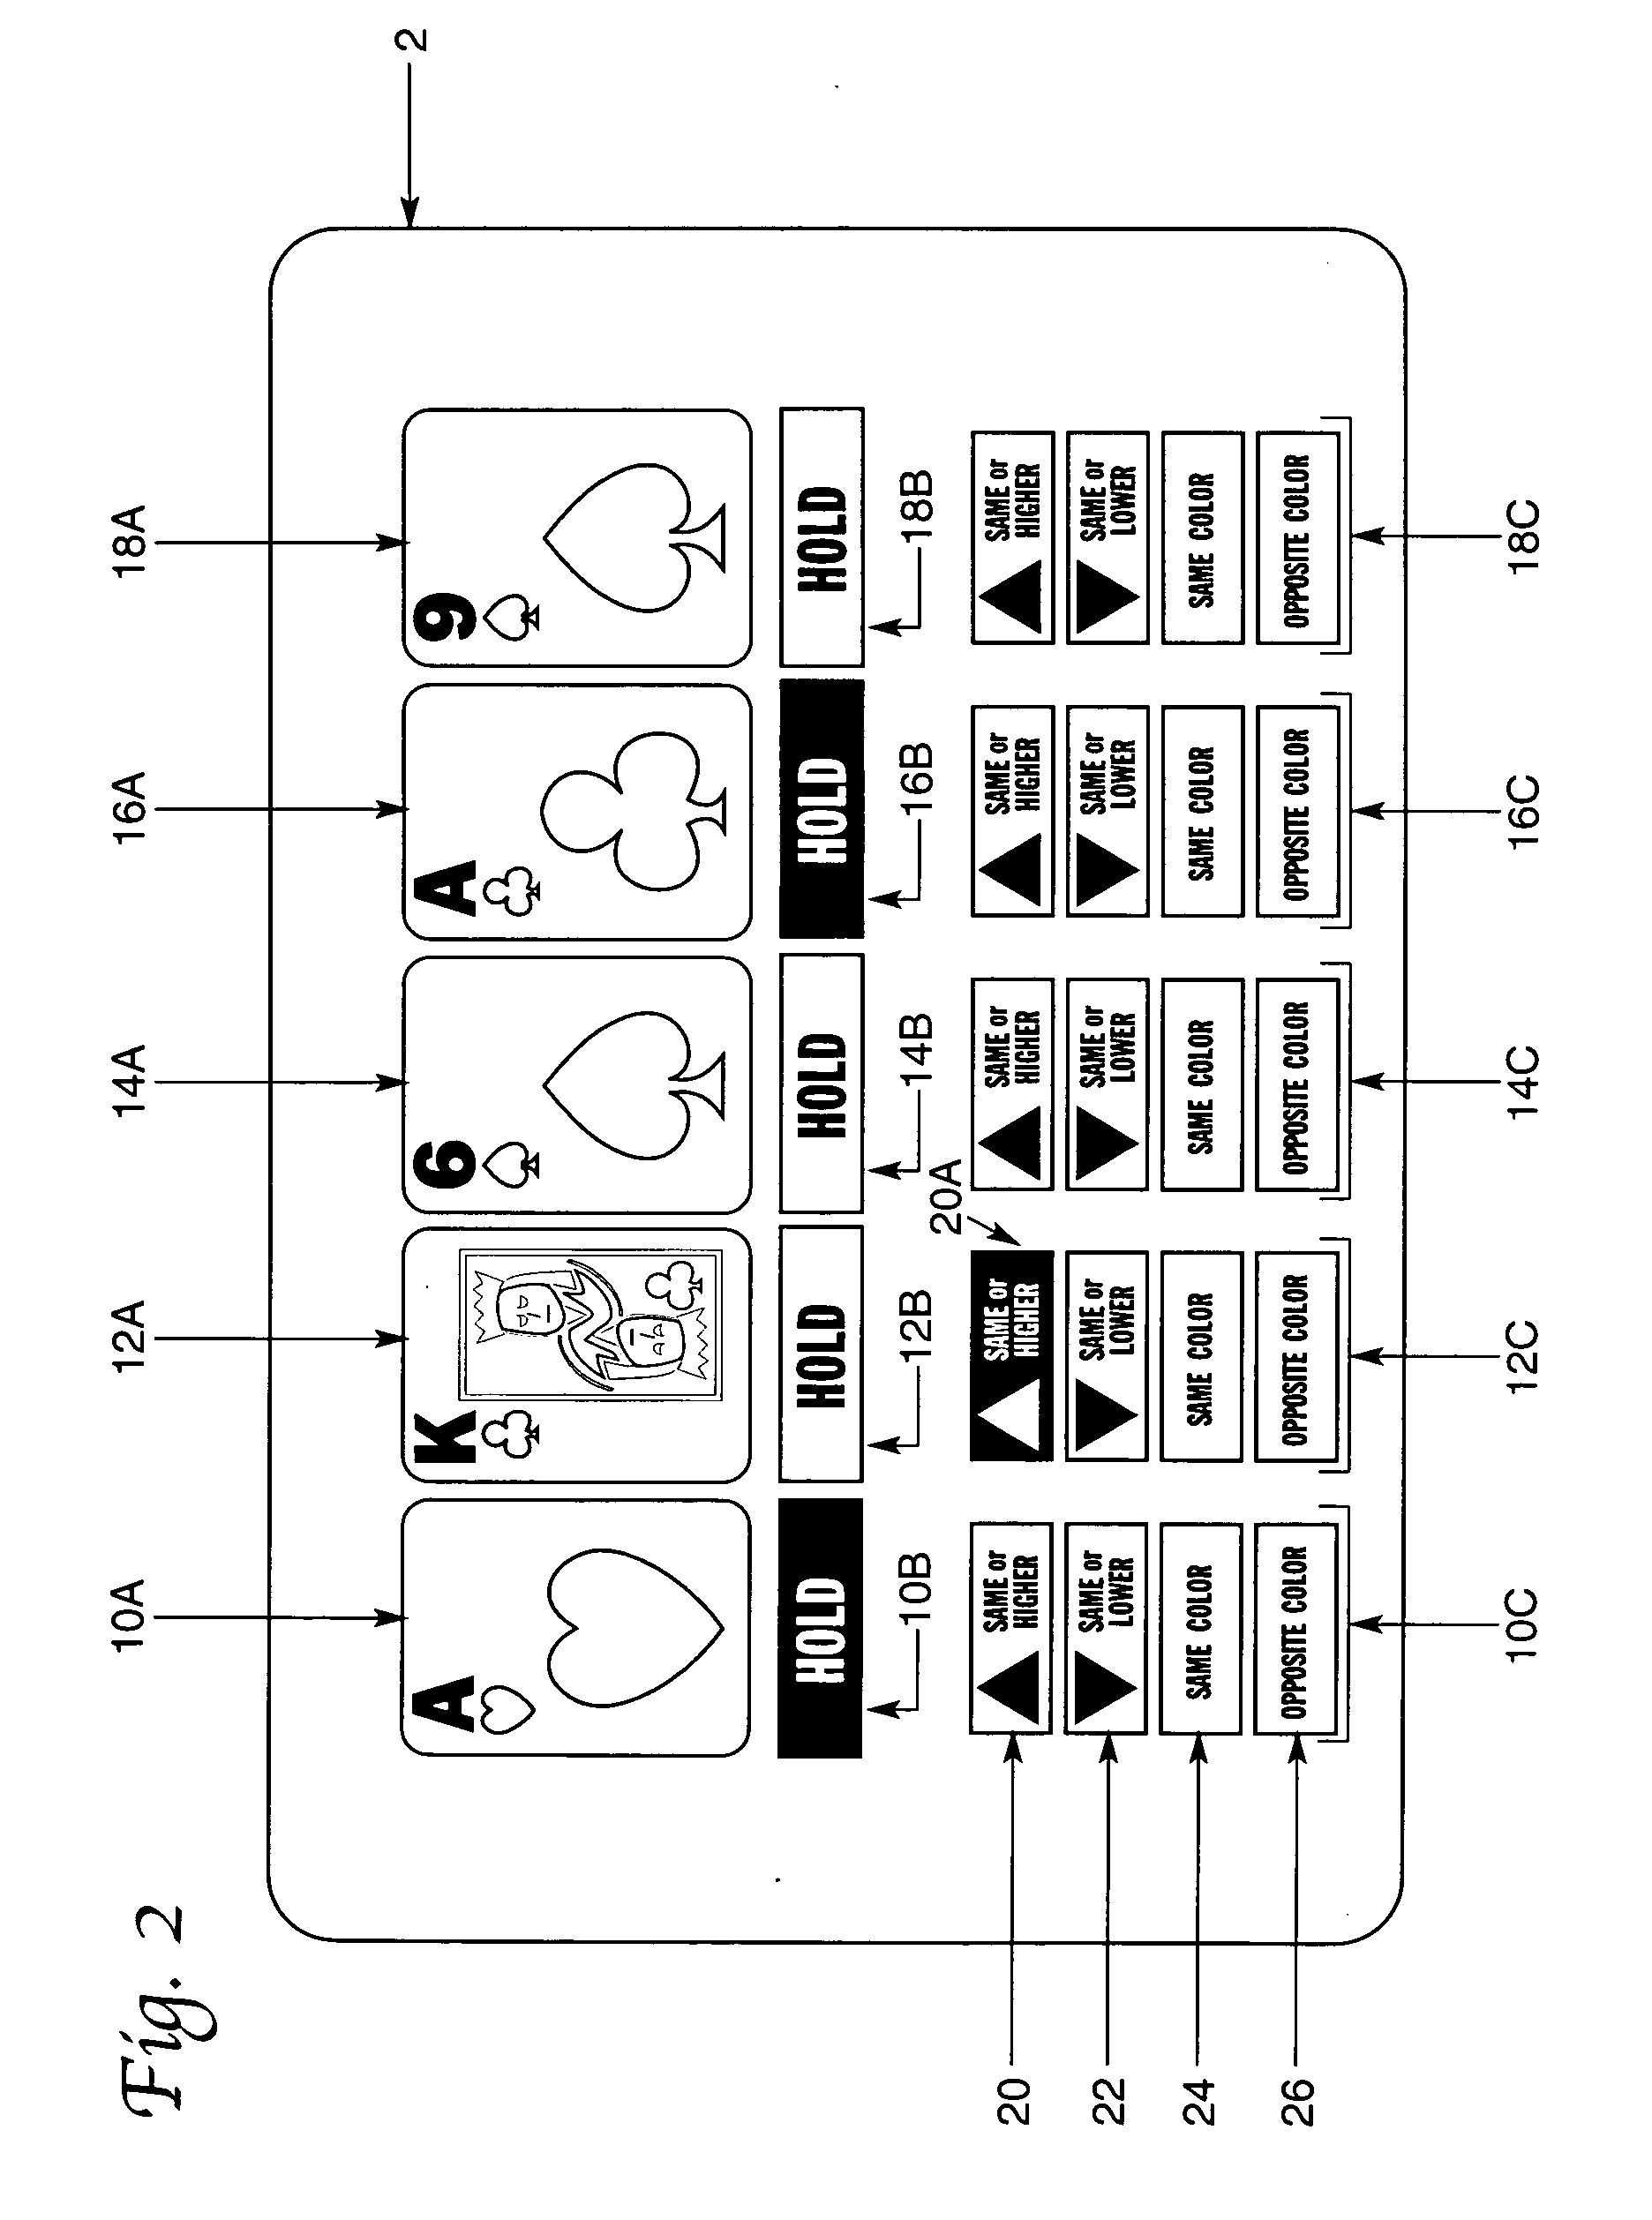 Replacement symbol selection in a method and apparatus for symbol play